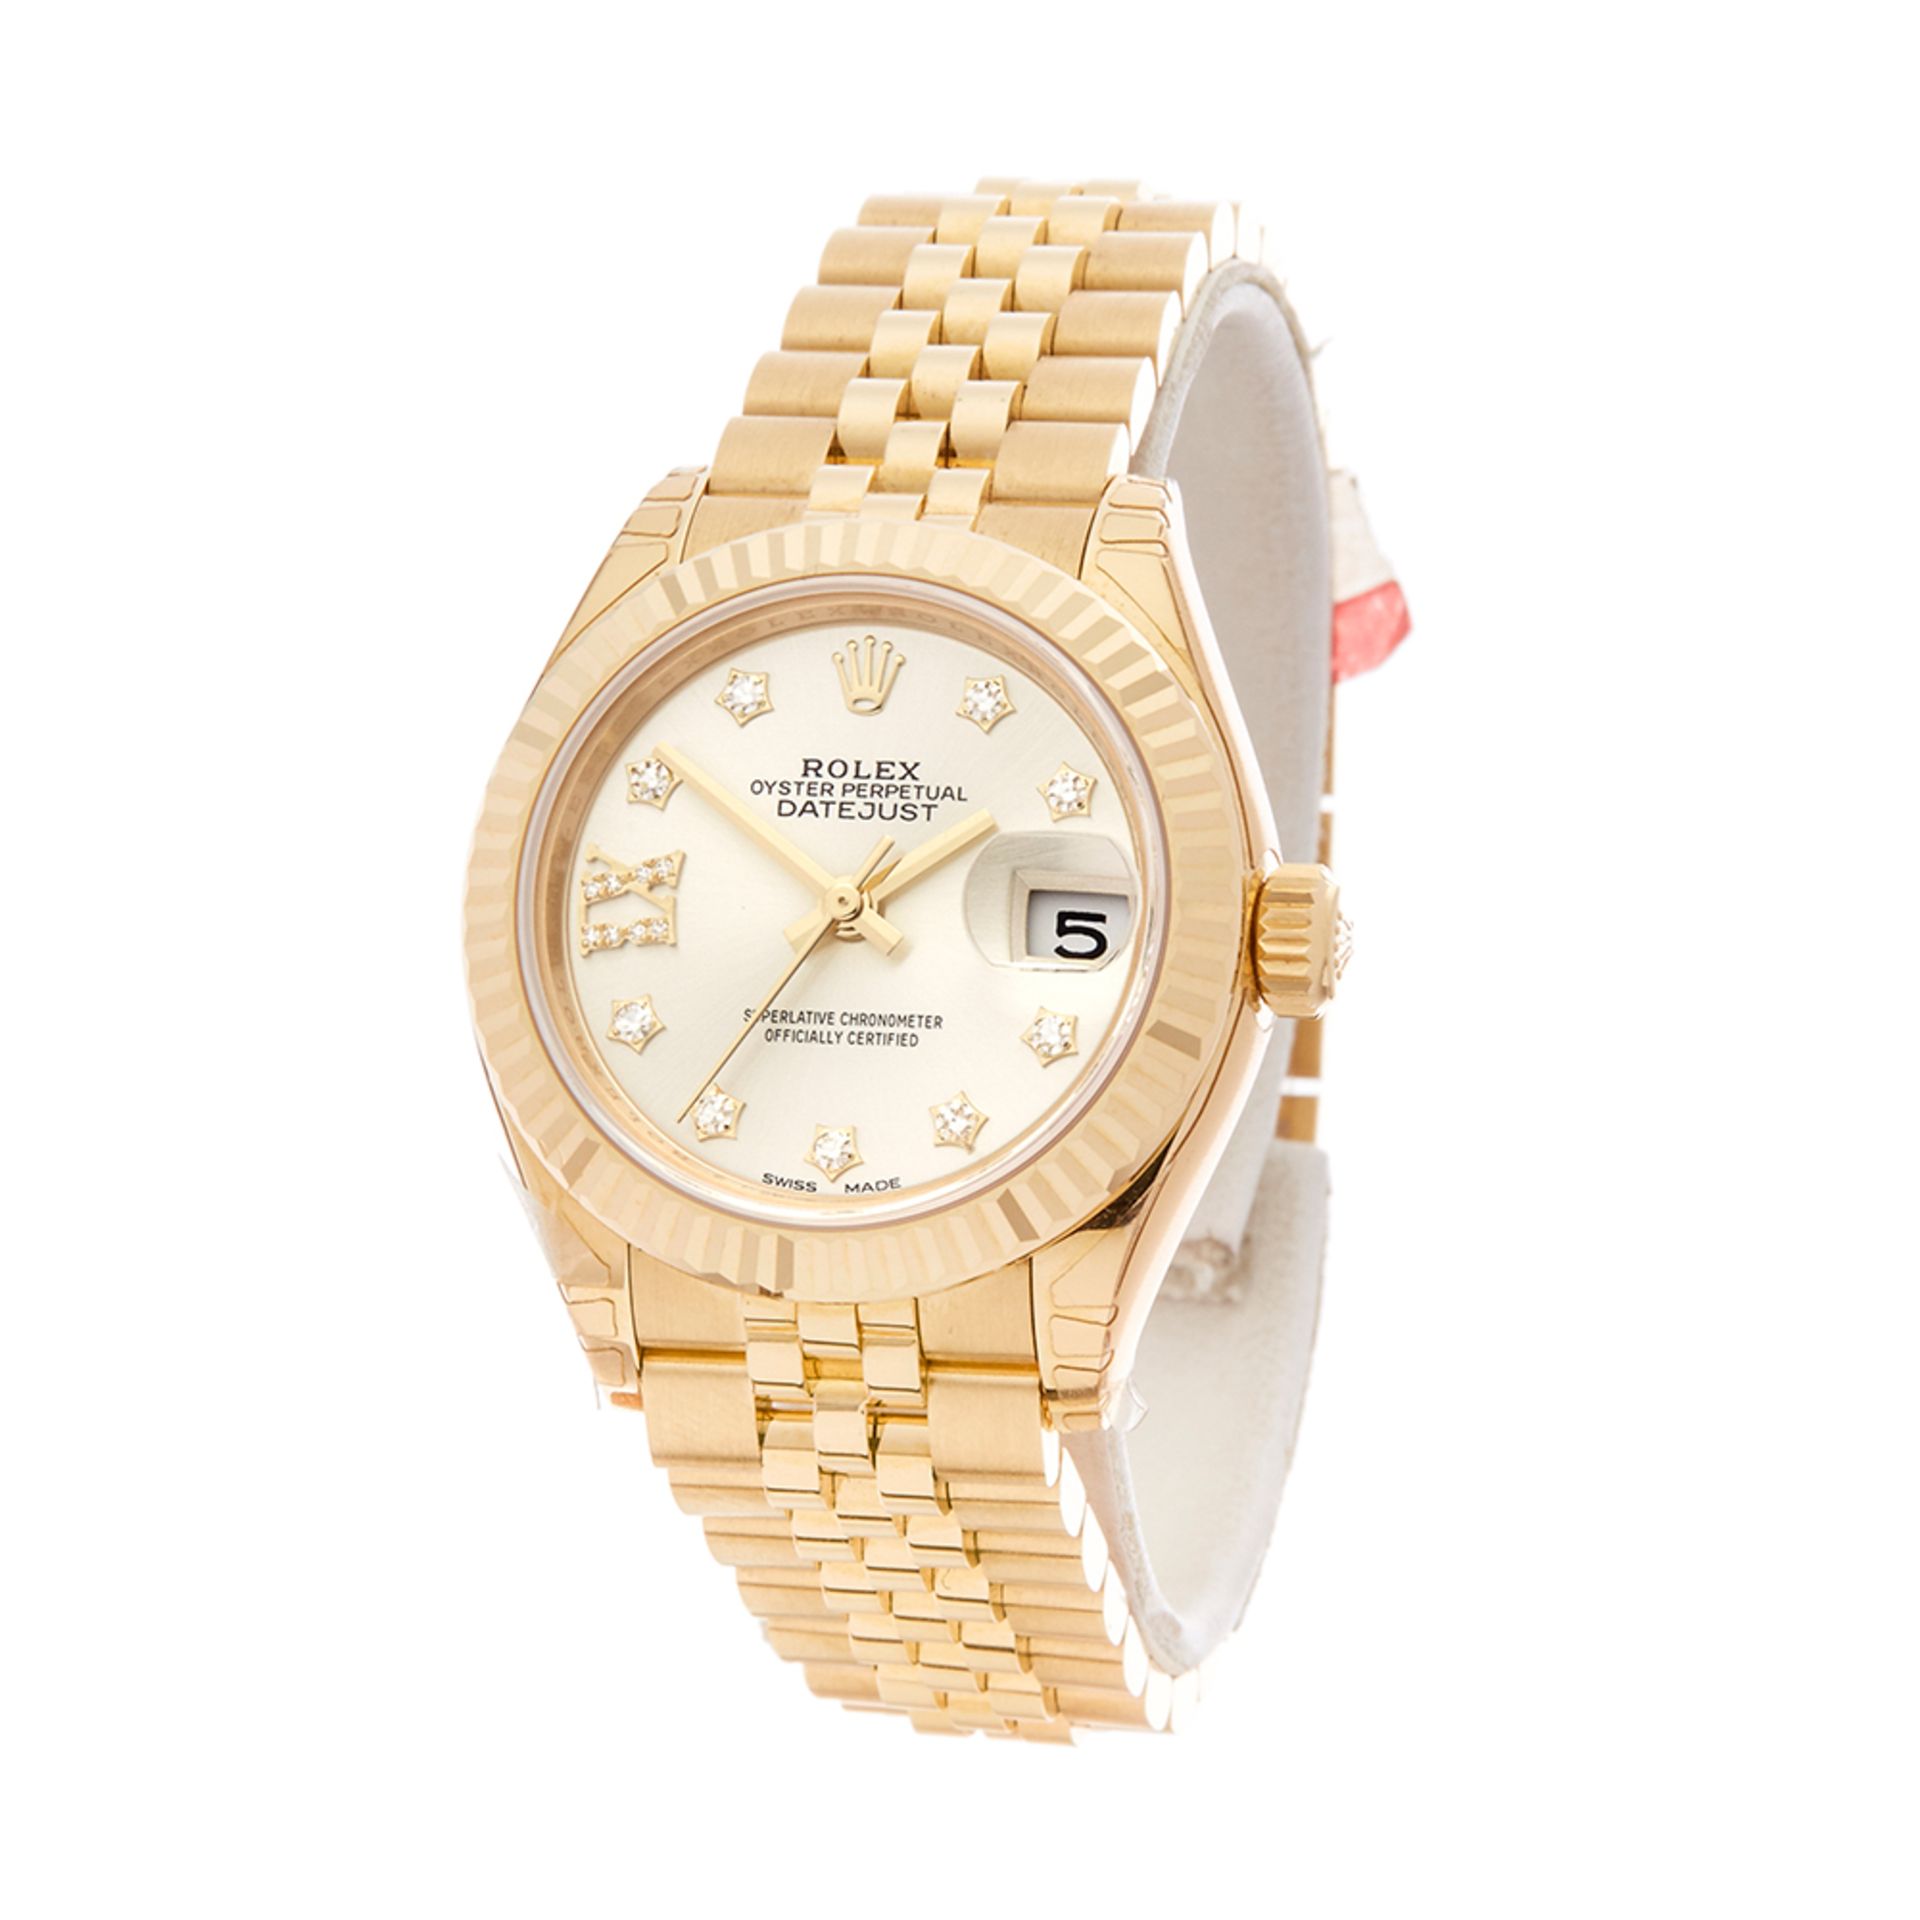 Rolex Datejust 28 28mm 18K Yellow Gold - 279178 - Image 3 of 7